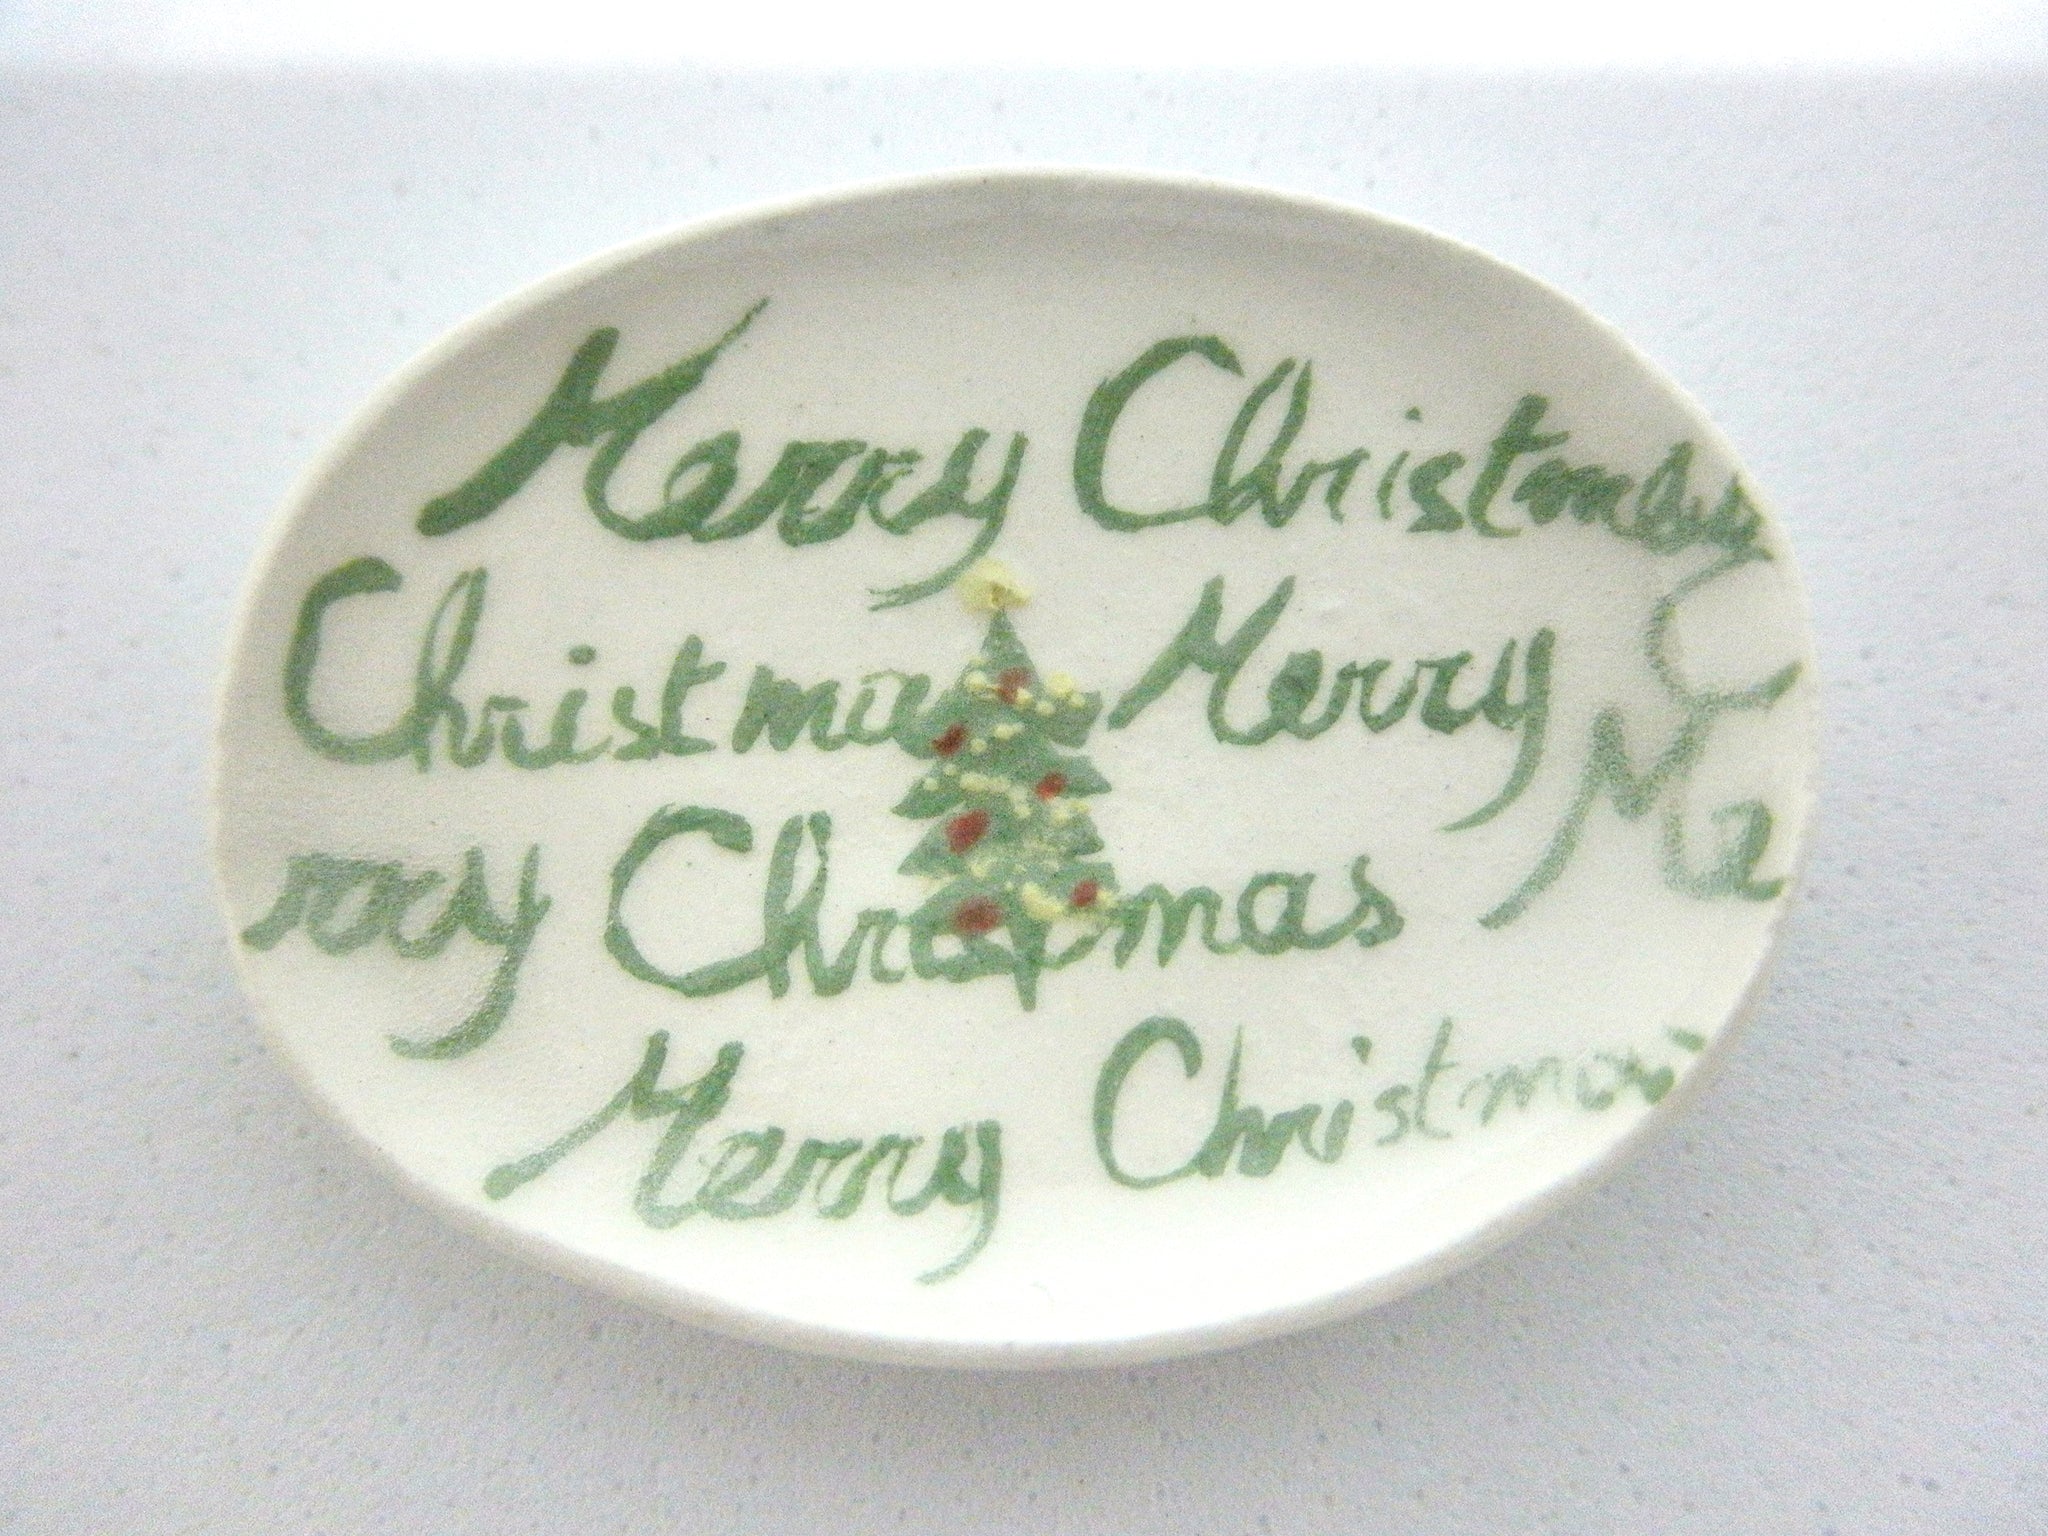 Miniature Christmas oblong plate - spruce with writing on background